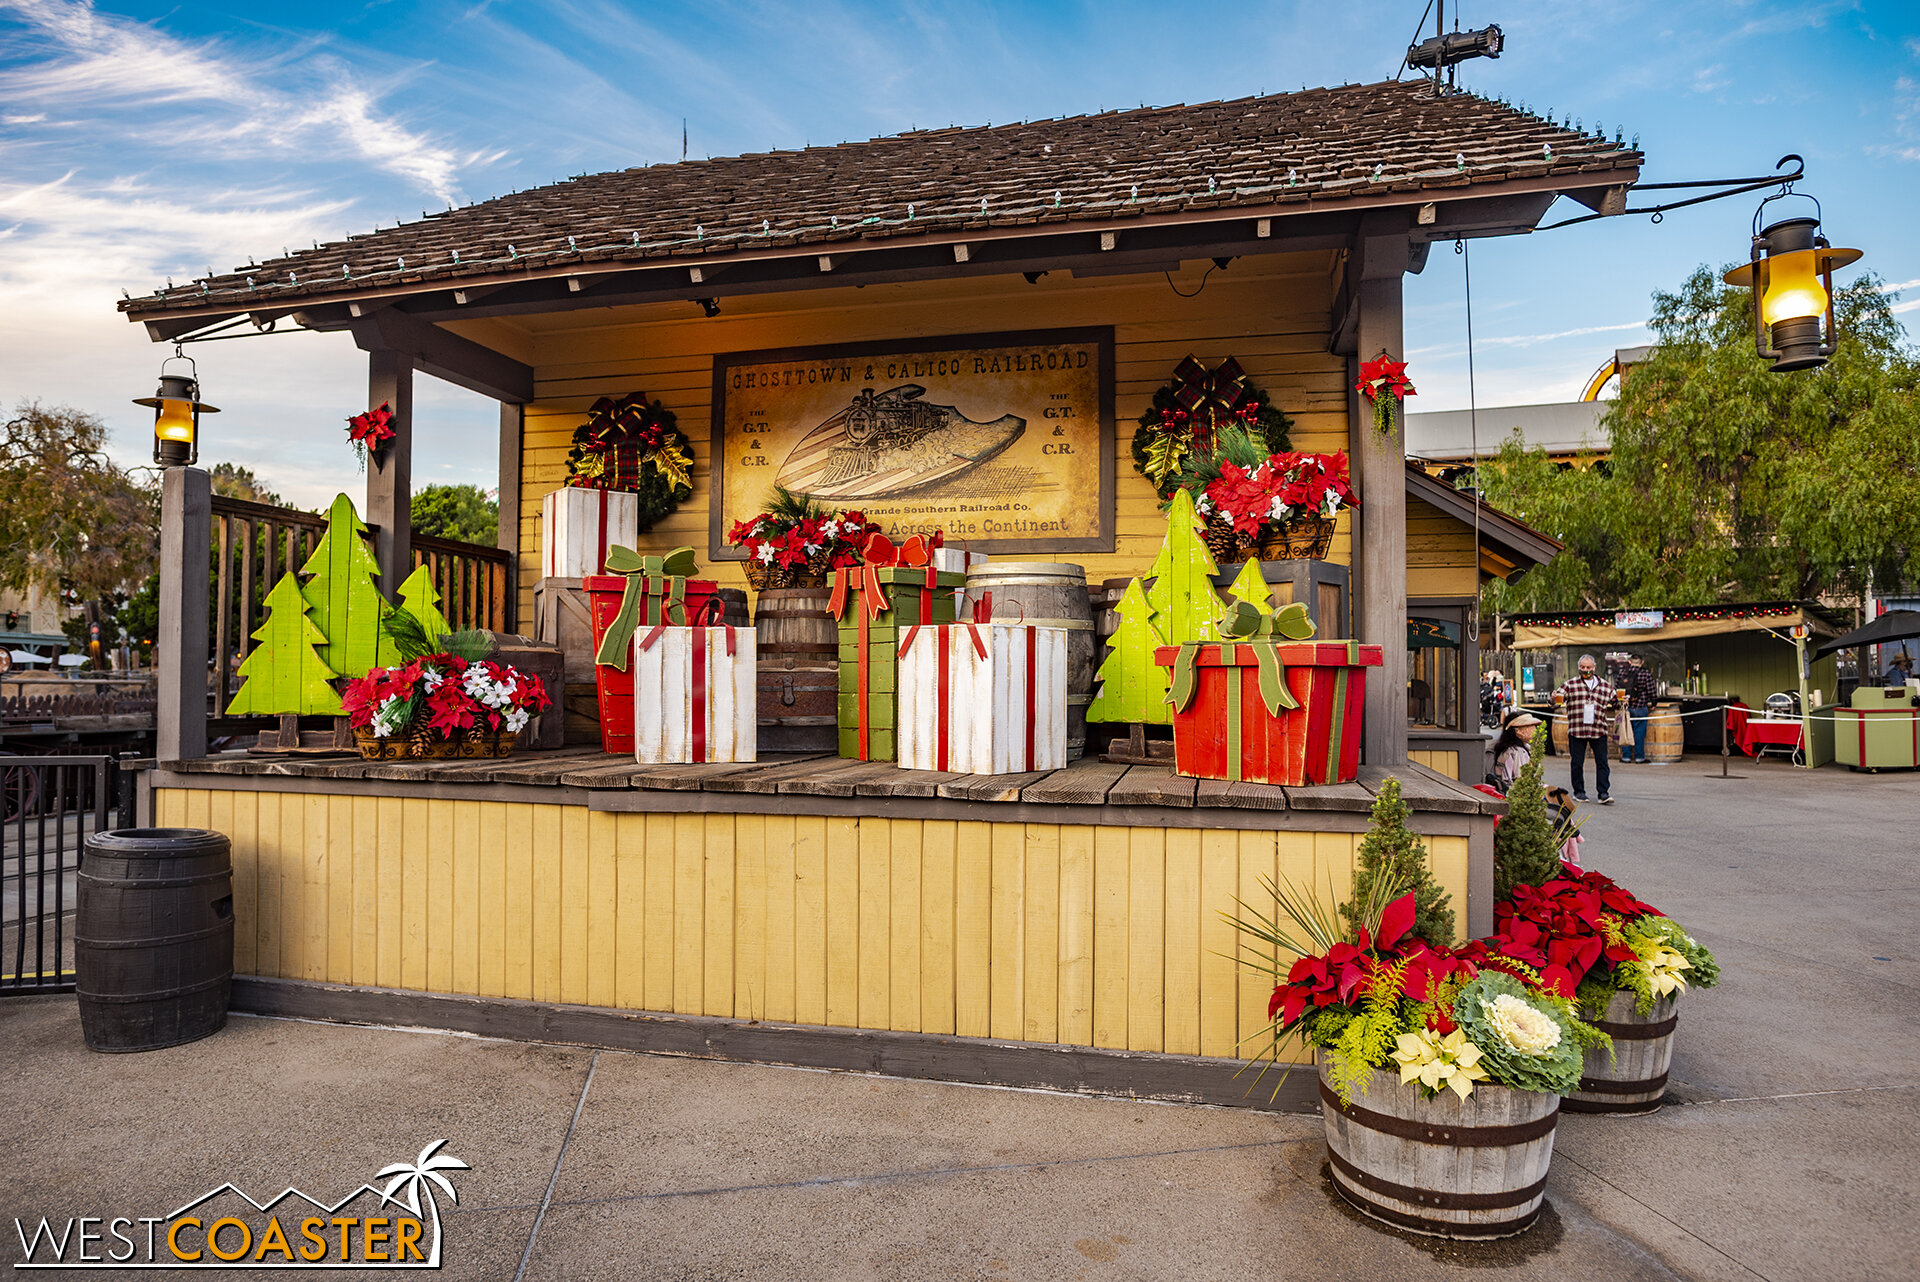  There is holiday theming everywhere, and it’s all so scenic and classic! 